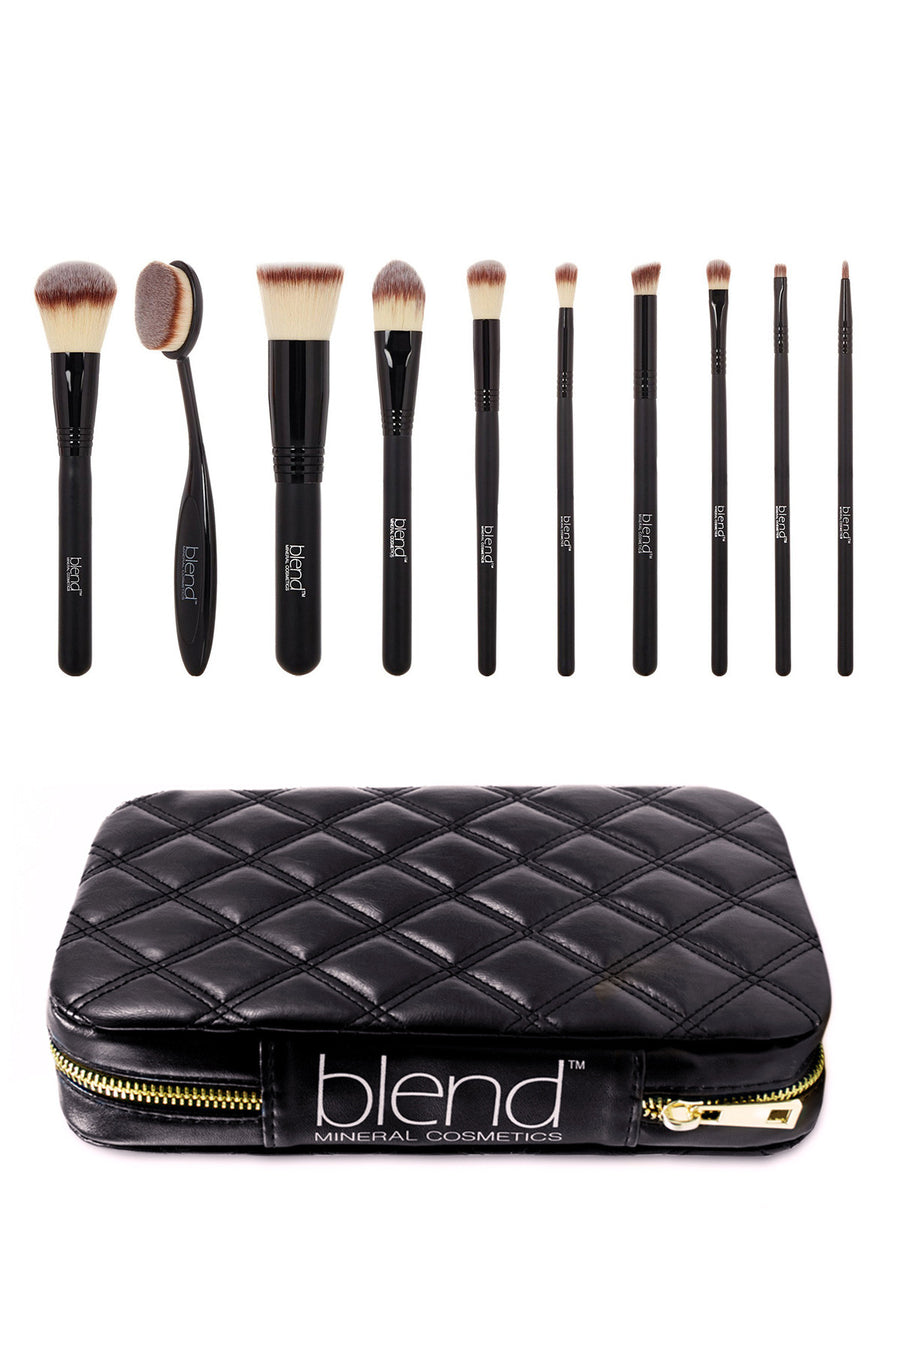 Professional Makeup Artist Complete 11-Piece Brush Kit - Mixed Brown